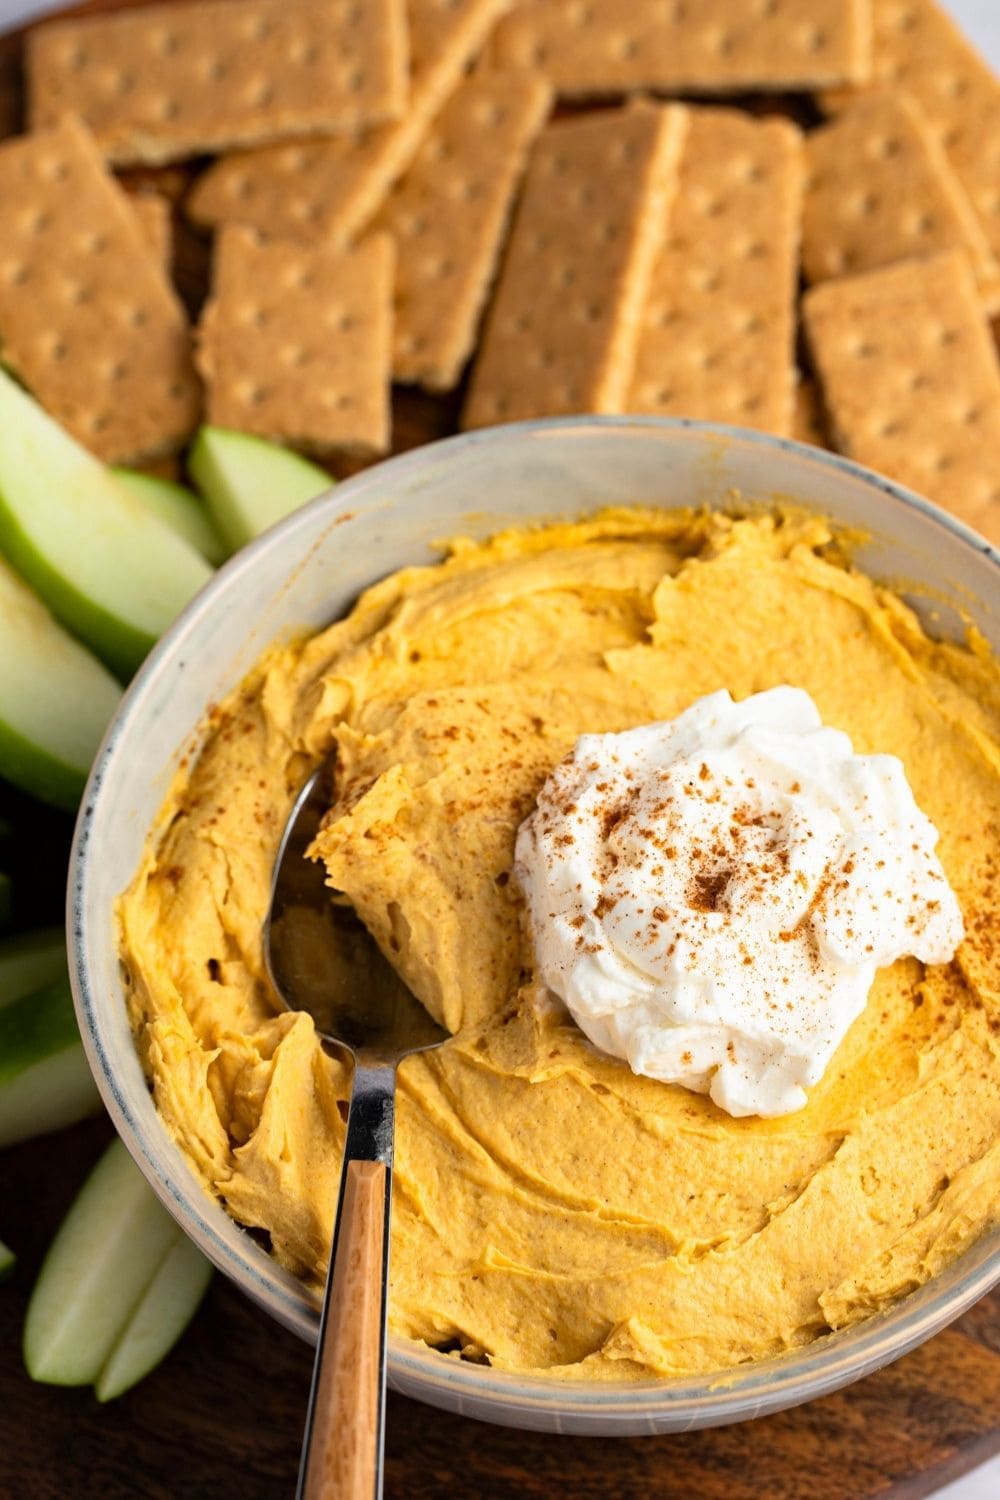 Pumpkin Fluff Dip with Whipped Cream and Sprinkled Cinnamon on Top